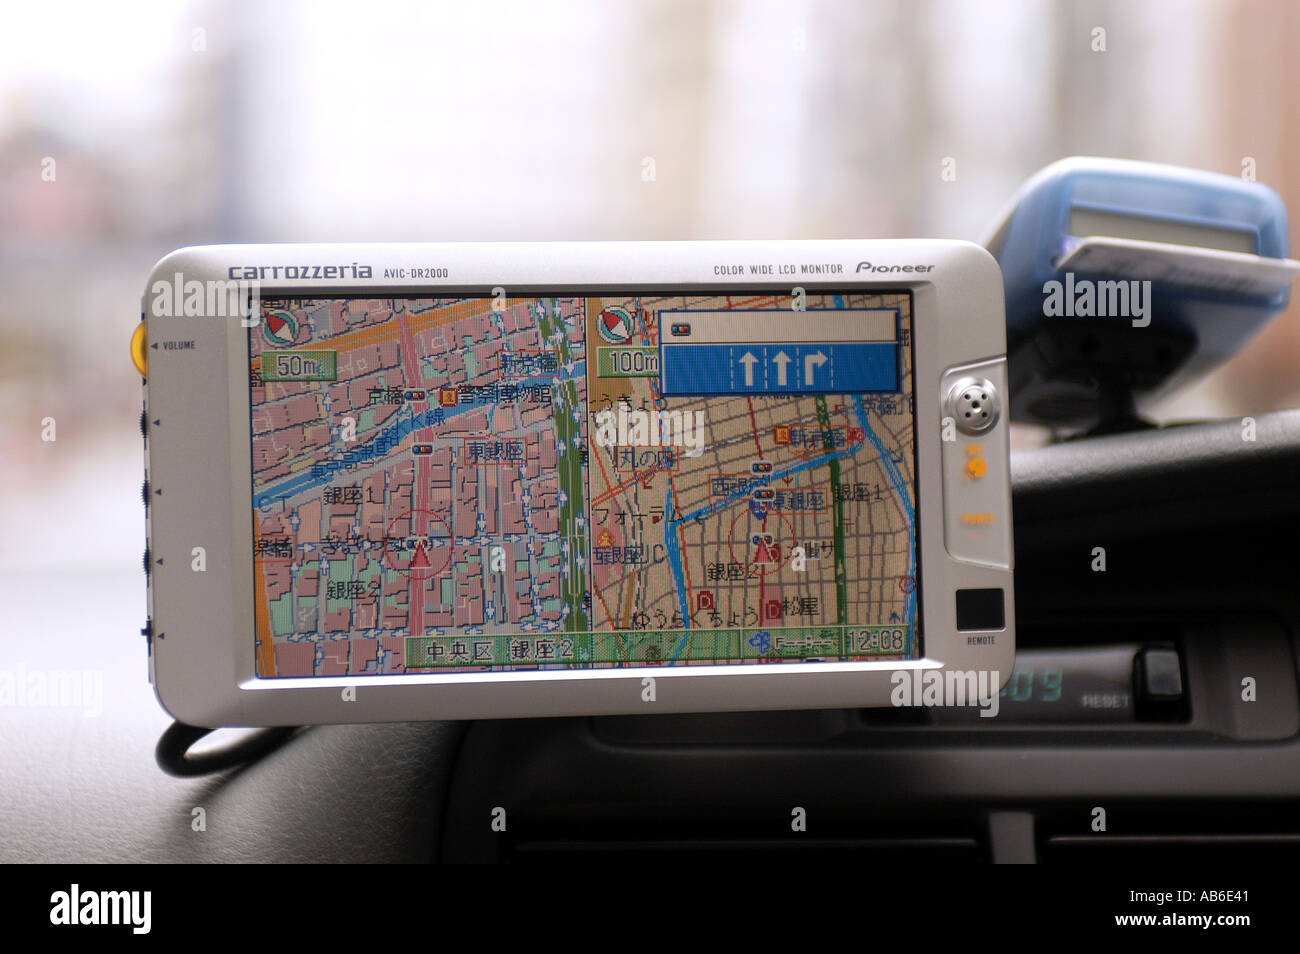 A GPS navigation display in a Tokyo Taxi Japan Stock Photo